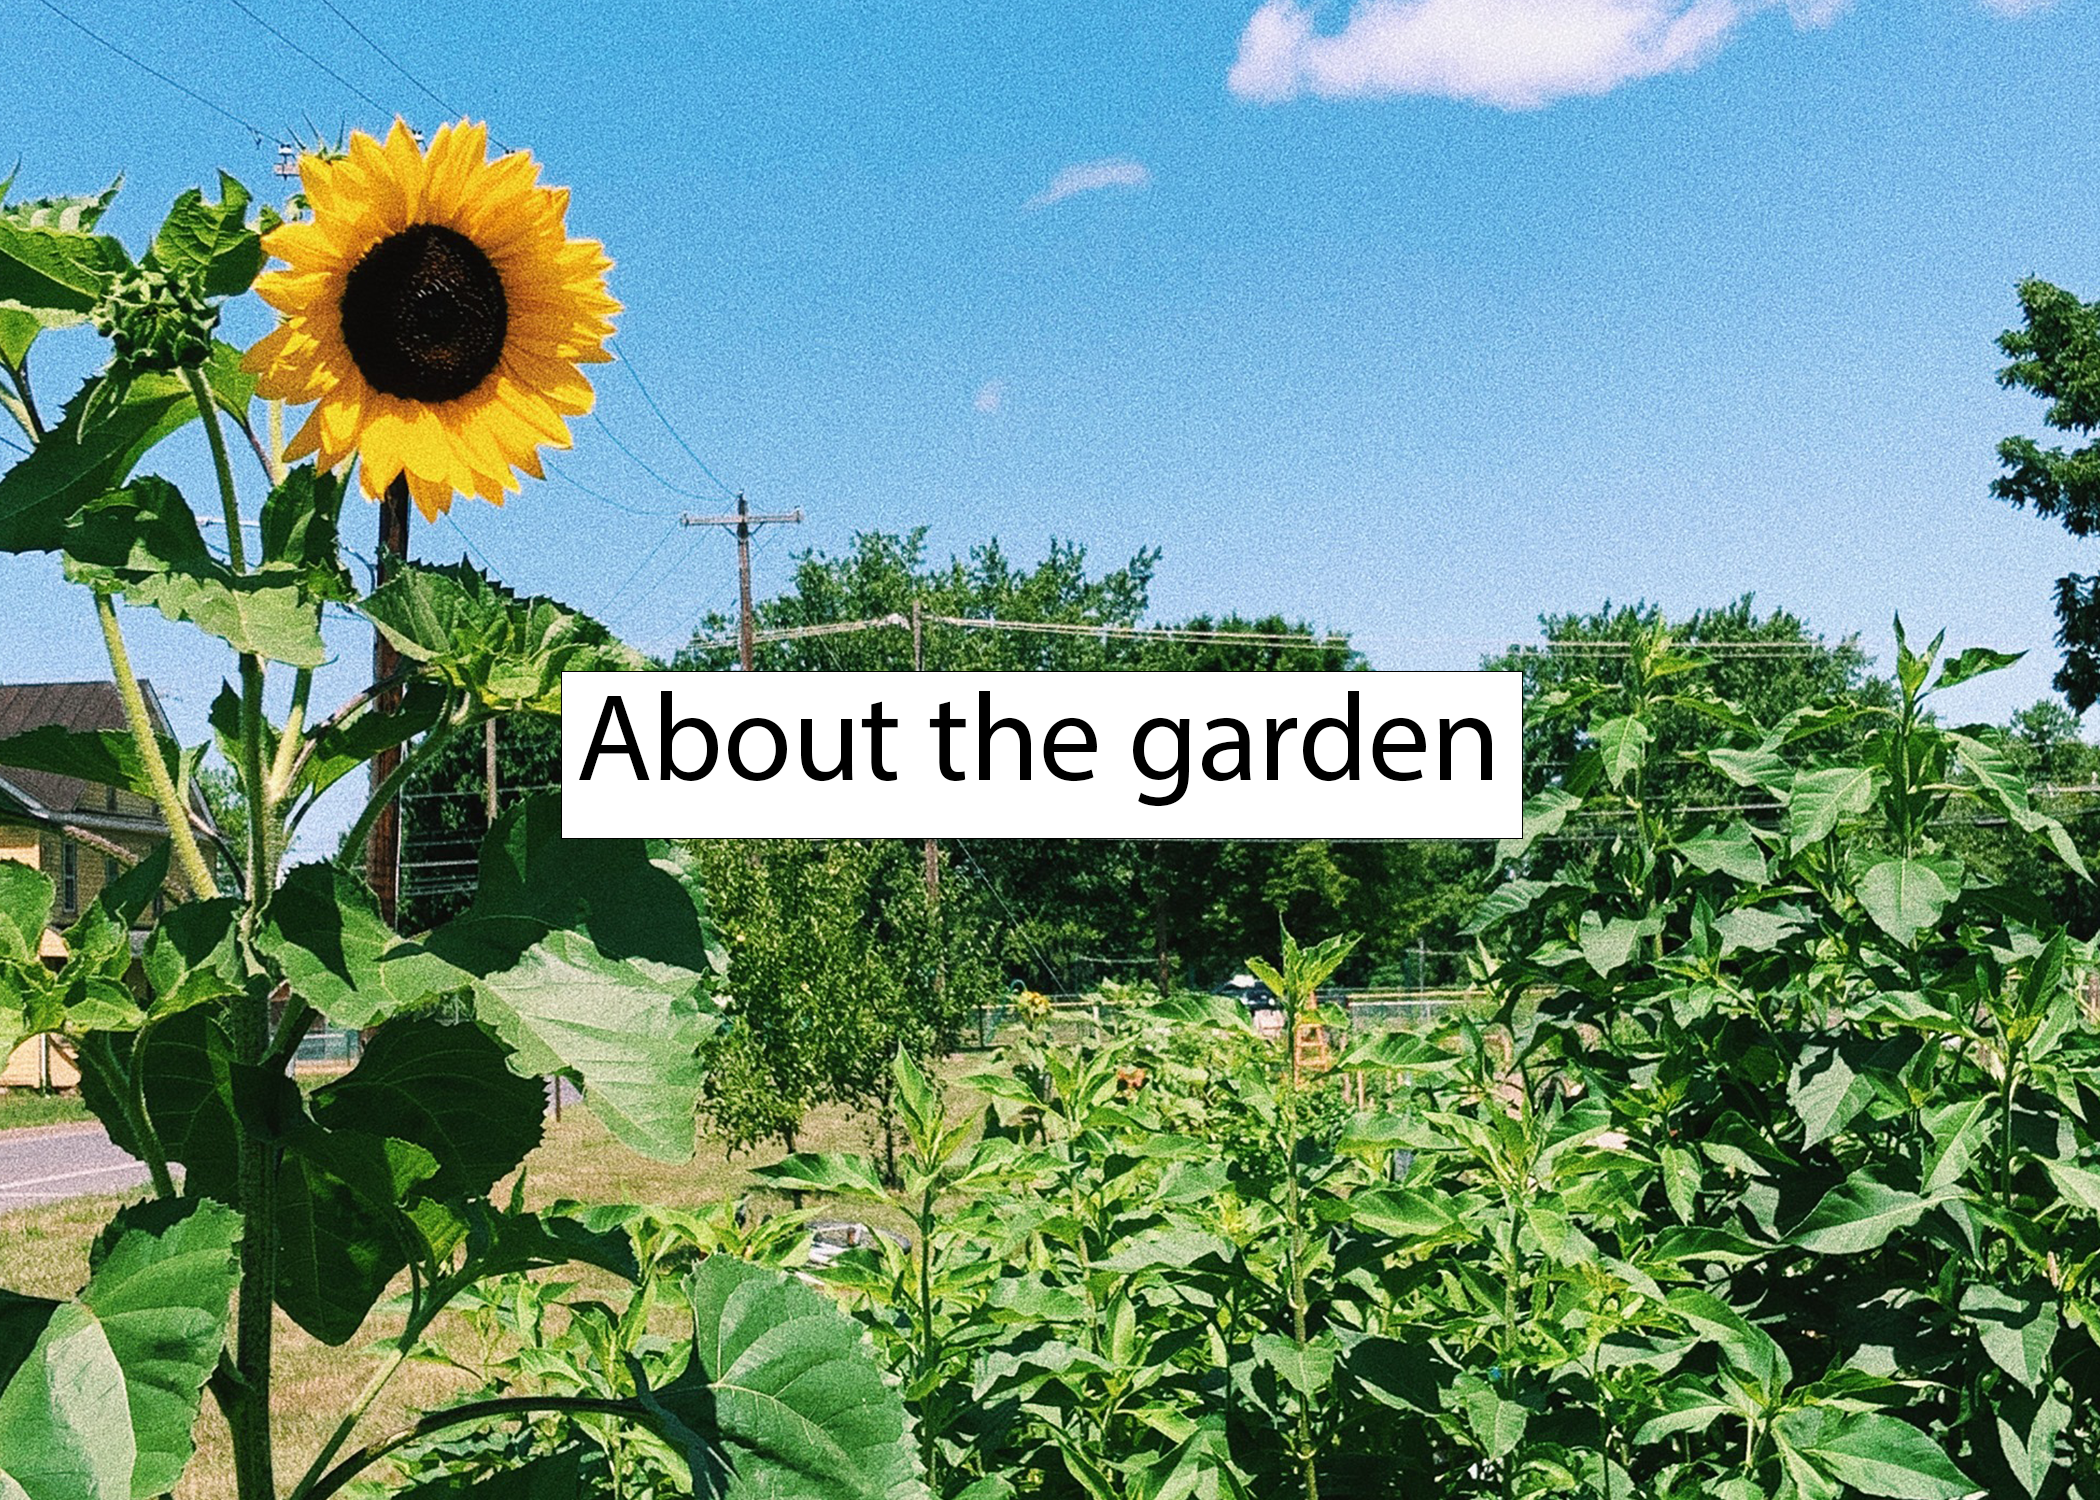 Picture of the garden with prominent sunflower labeled "About the garden"